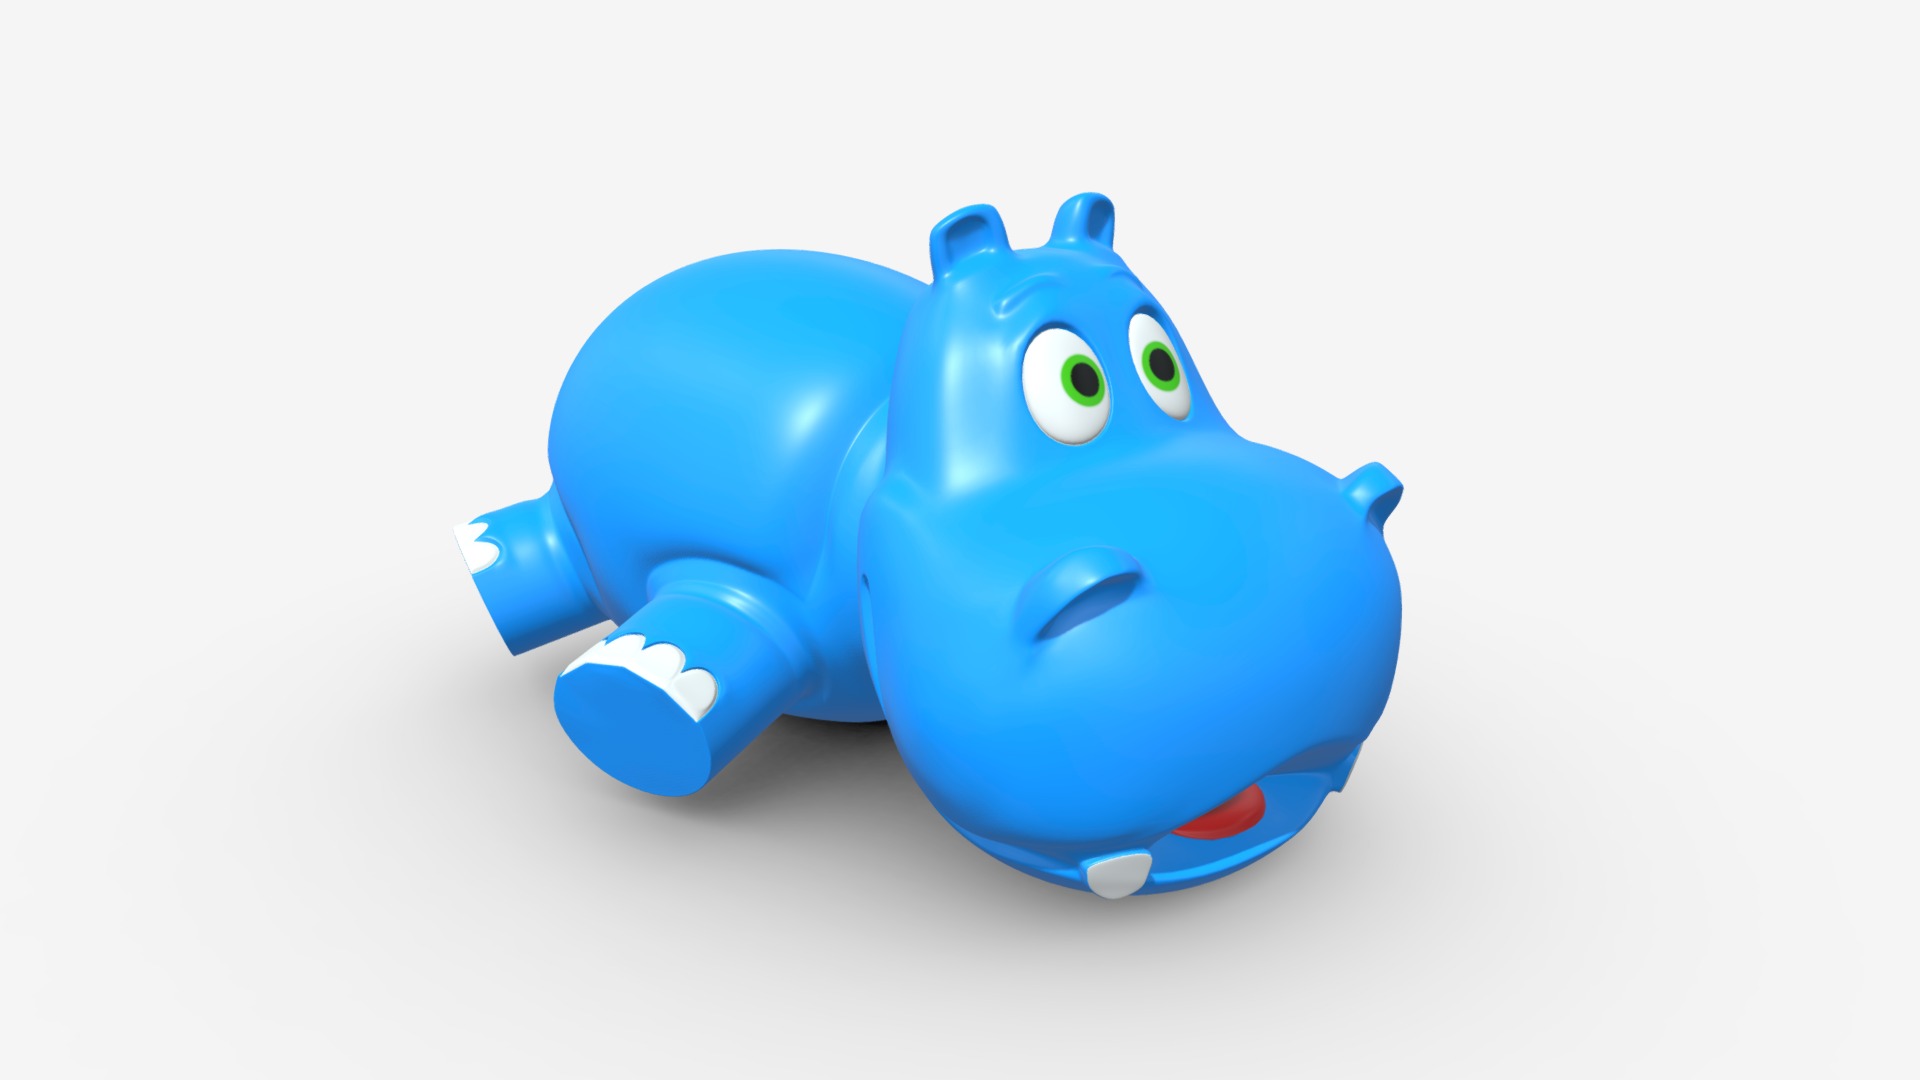 3D model hippo toy - This is a 3D model of the hippo toy. The 3D model is about a blue toy on a white background.